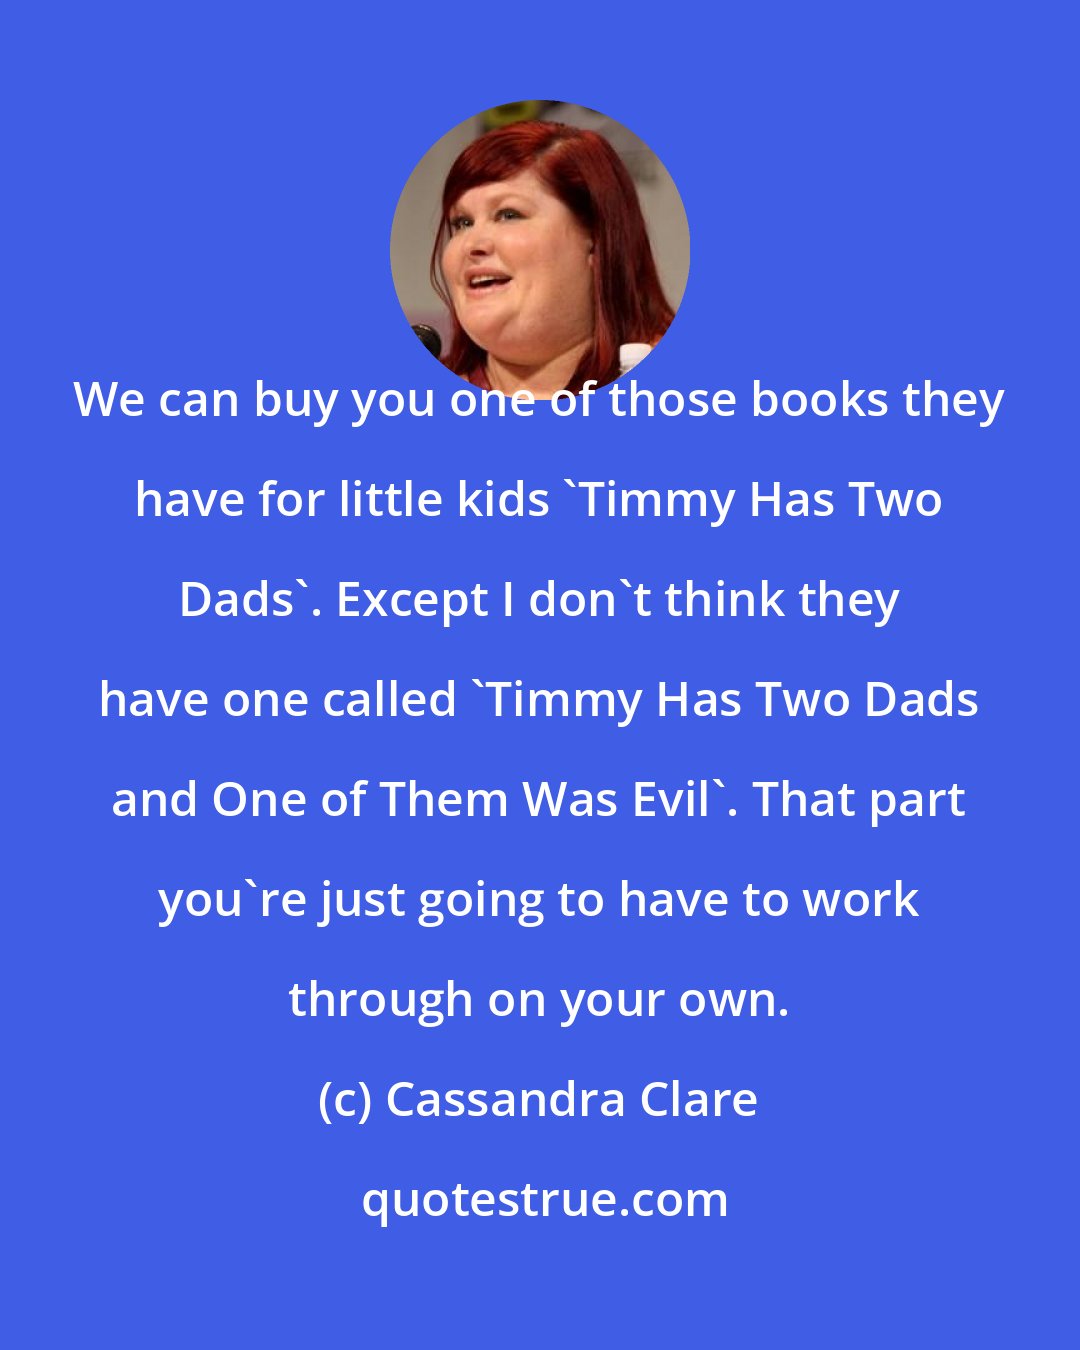 Cassandra Clare: We can buy you one of those books they have for little kids 'Timmy Has Two Dads'. Except I don't think they have one called 'Timmy Has Two Dads and One of Them Was Evil'. That part you're just going to have to work through on your own.